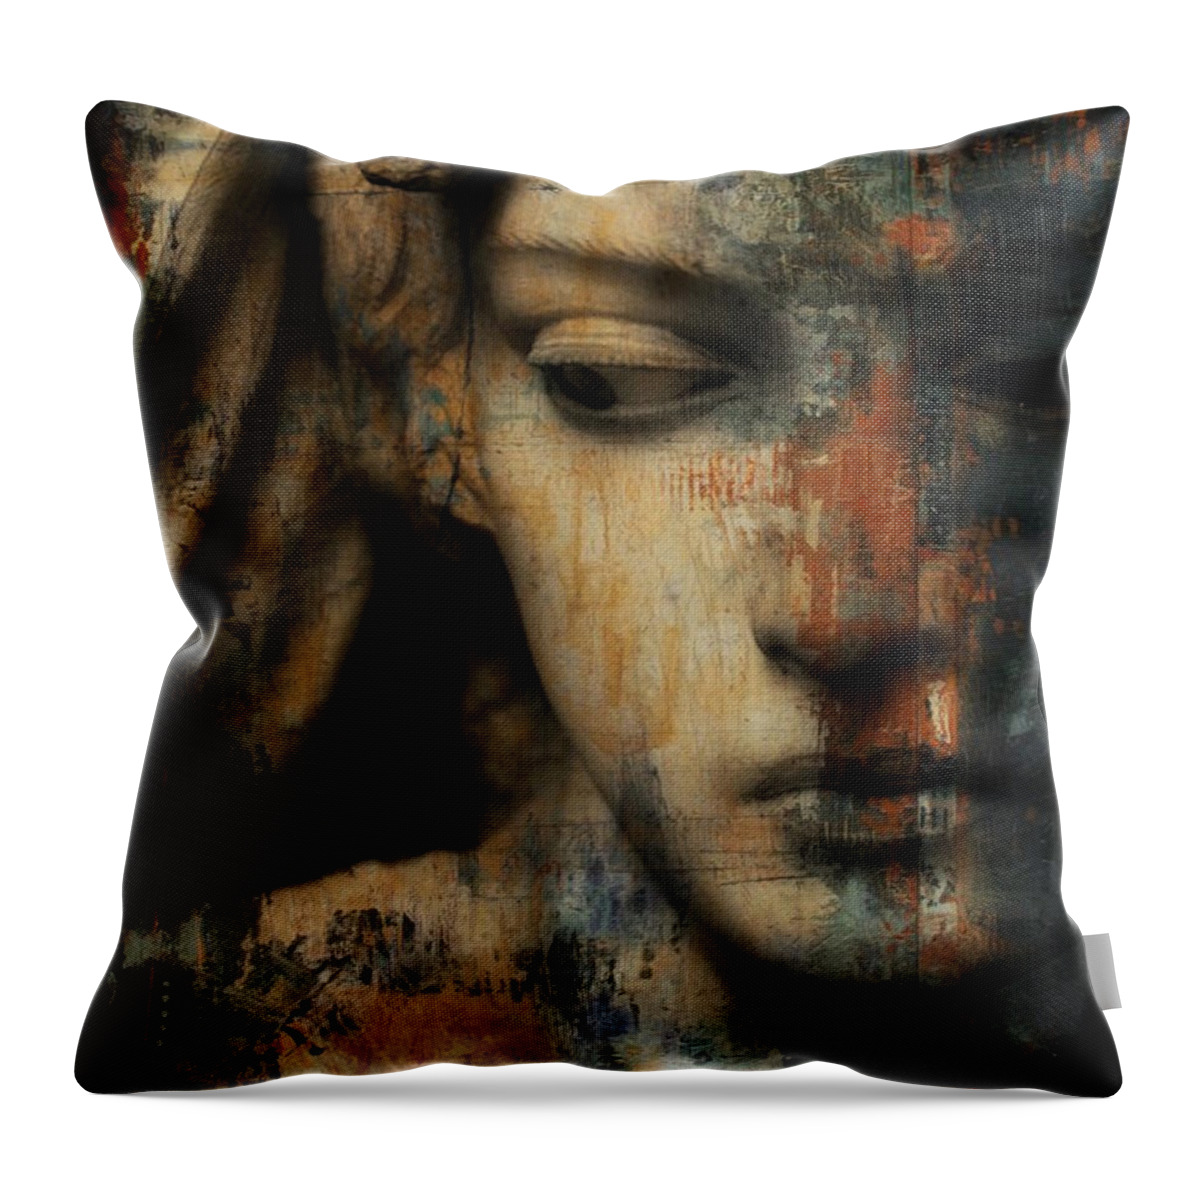 Emotion Throw Pillow featuring the digital art Intermezzo by Paul Lovering